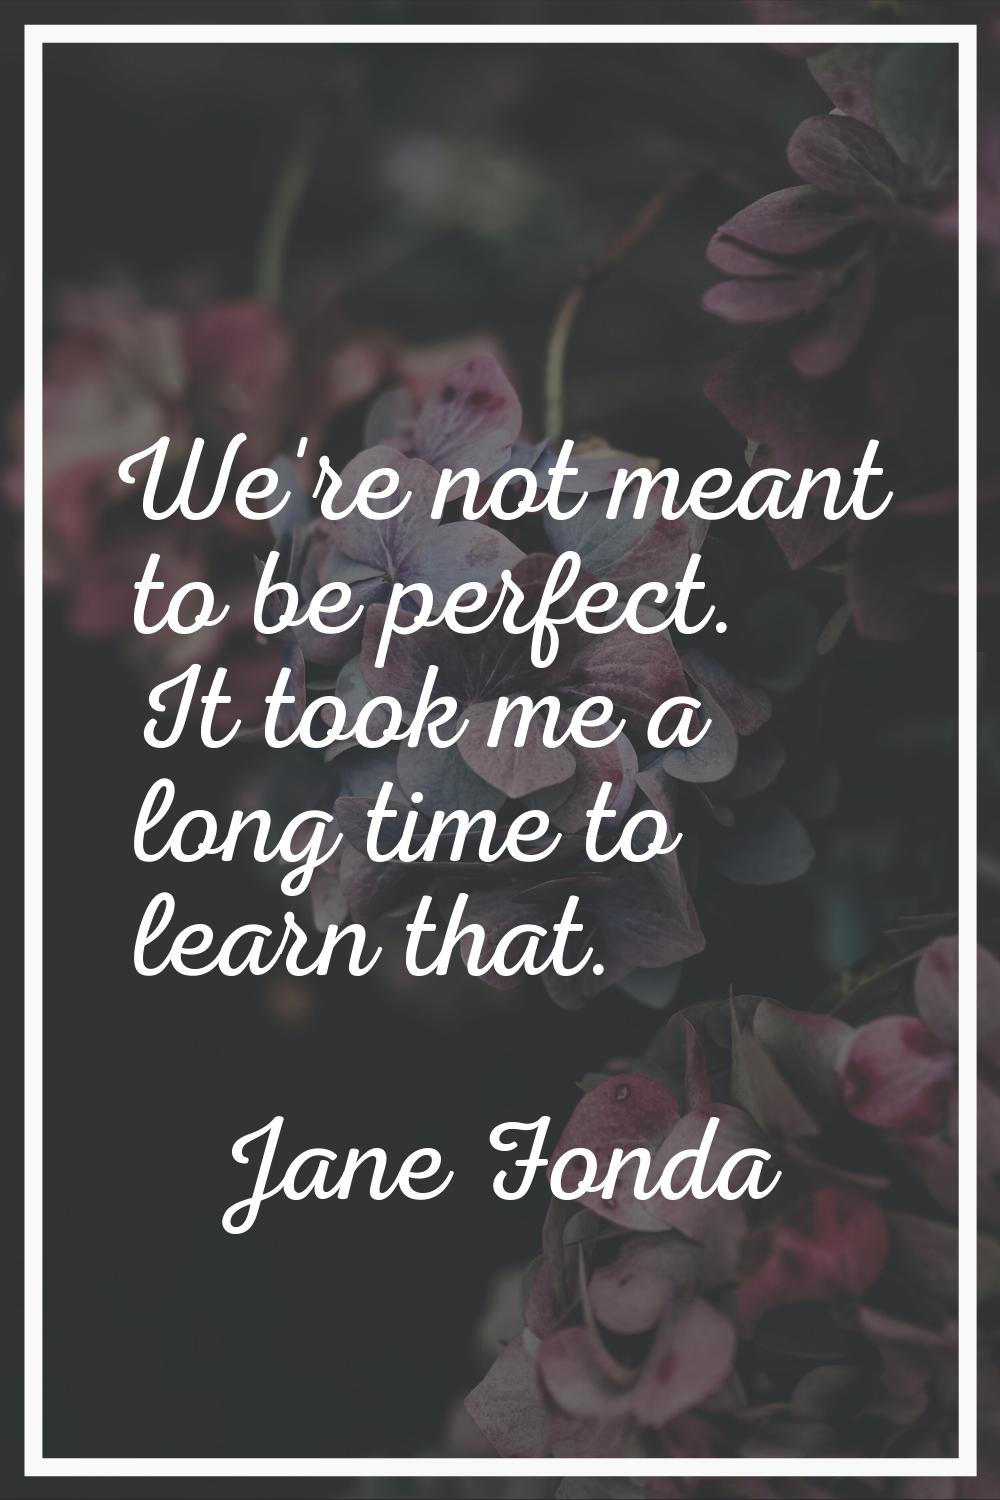 We're not meant to be perfect. It took me a long time to learn that.